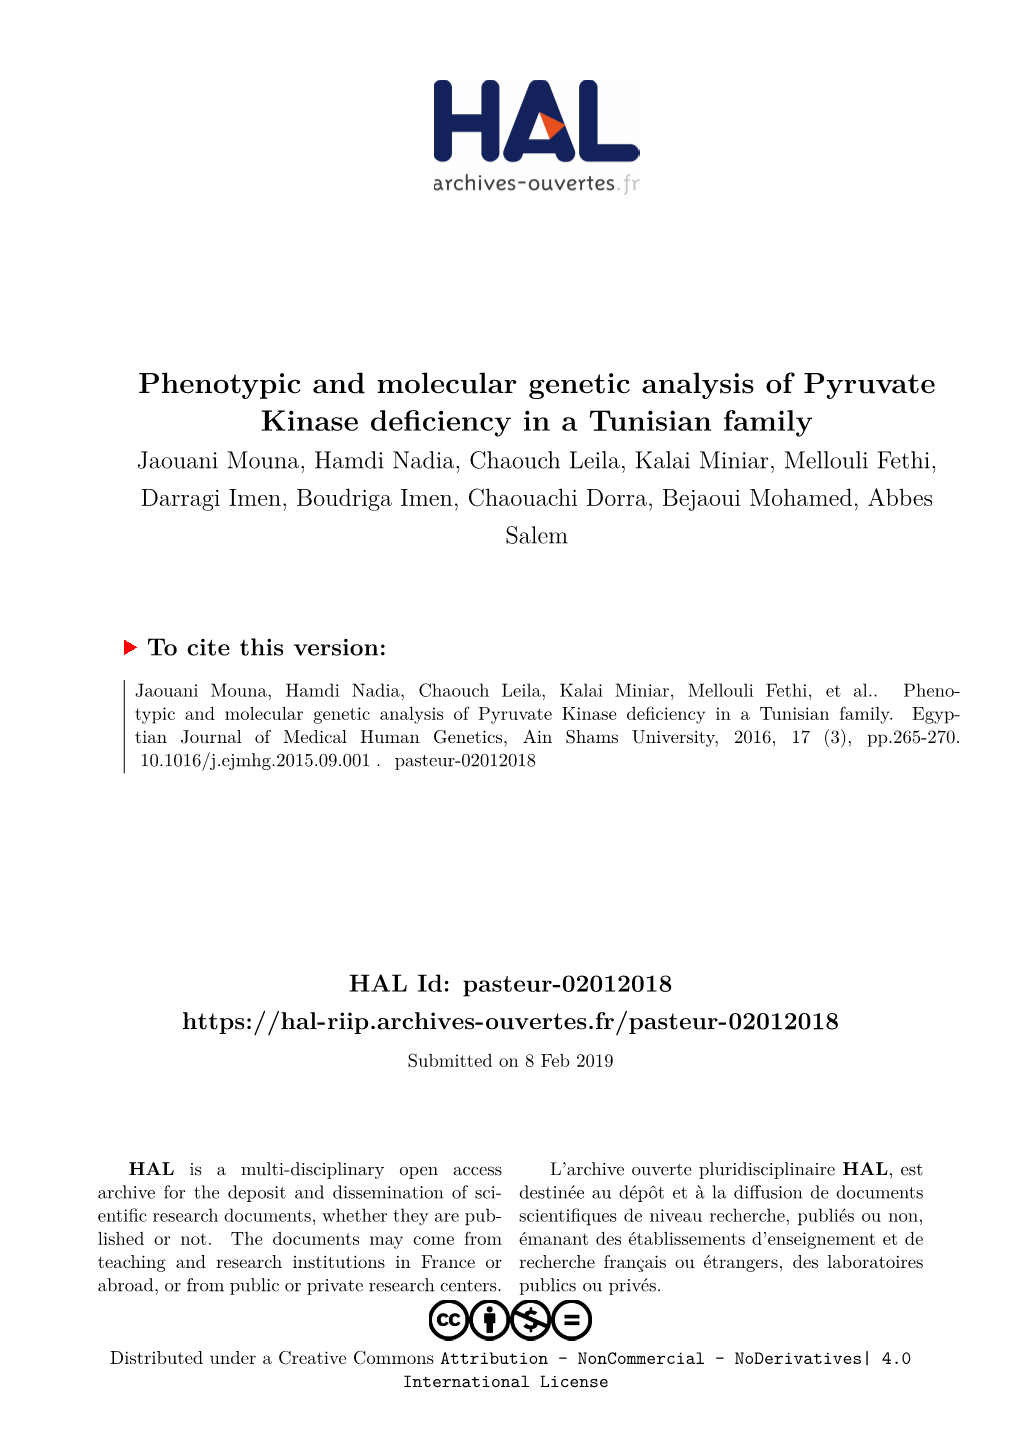 Phenotypic and Molecular Genetic Analysis of Pyruvate Kinase Deficiency in a Tunisian Family